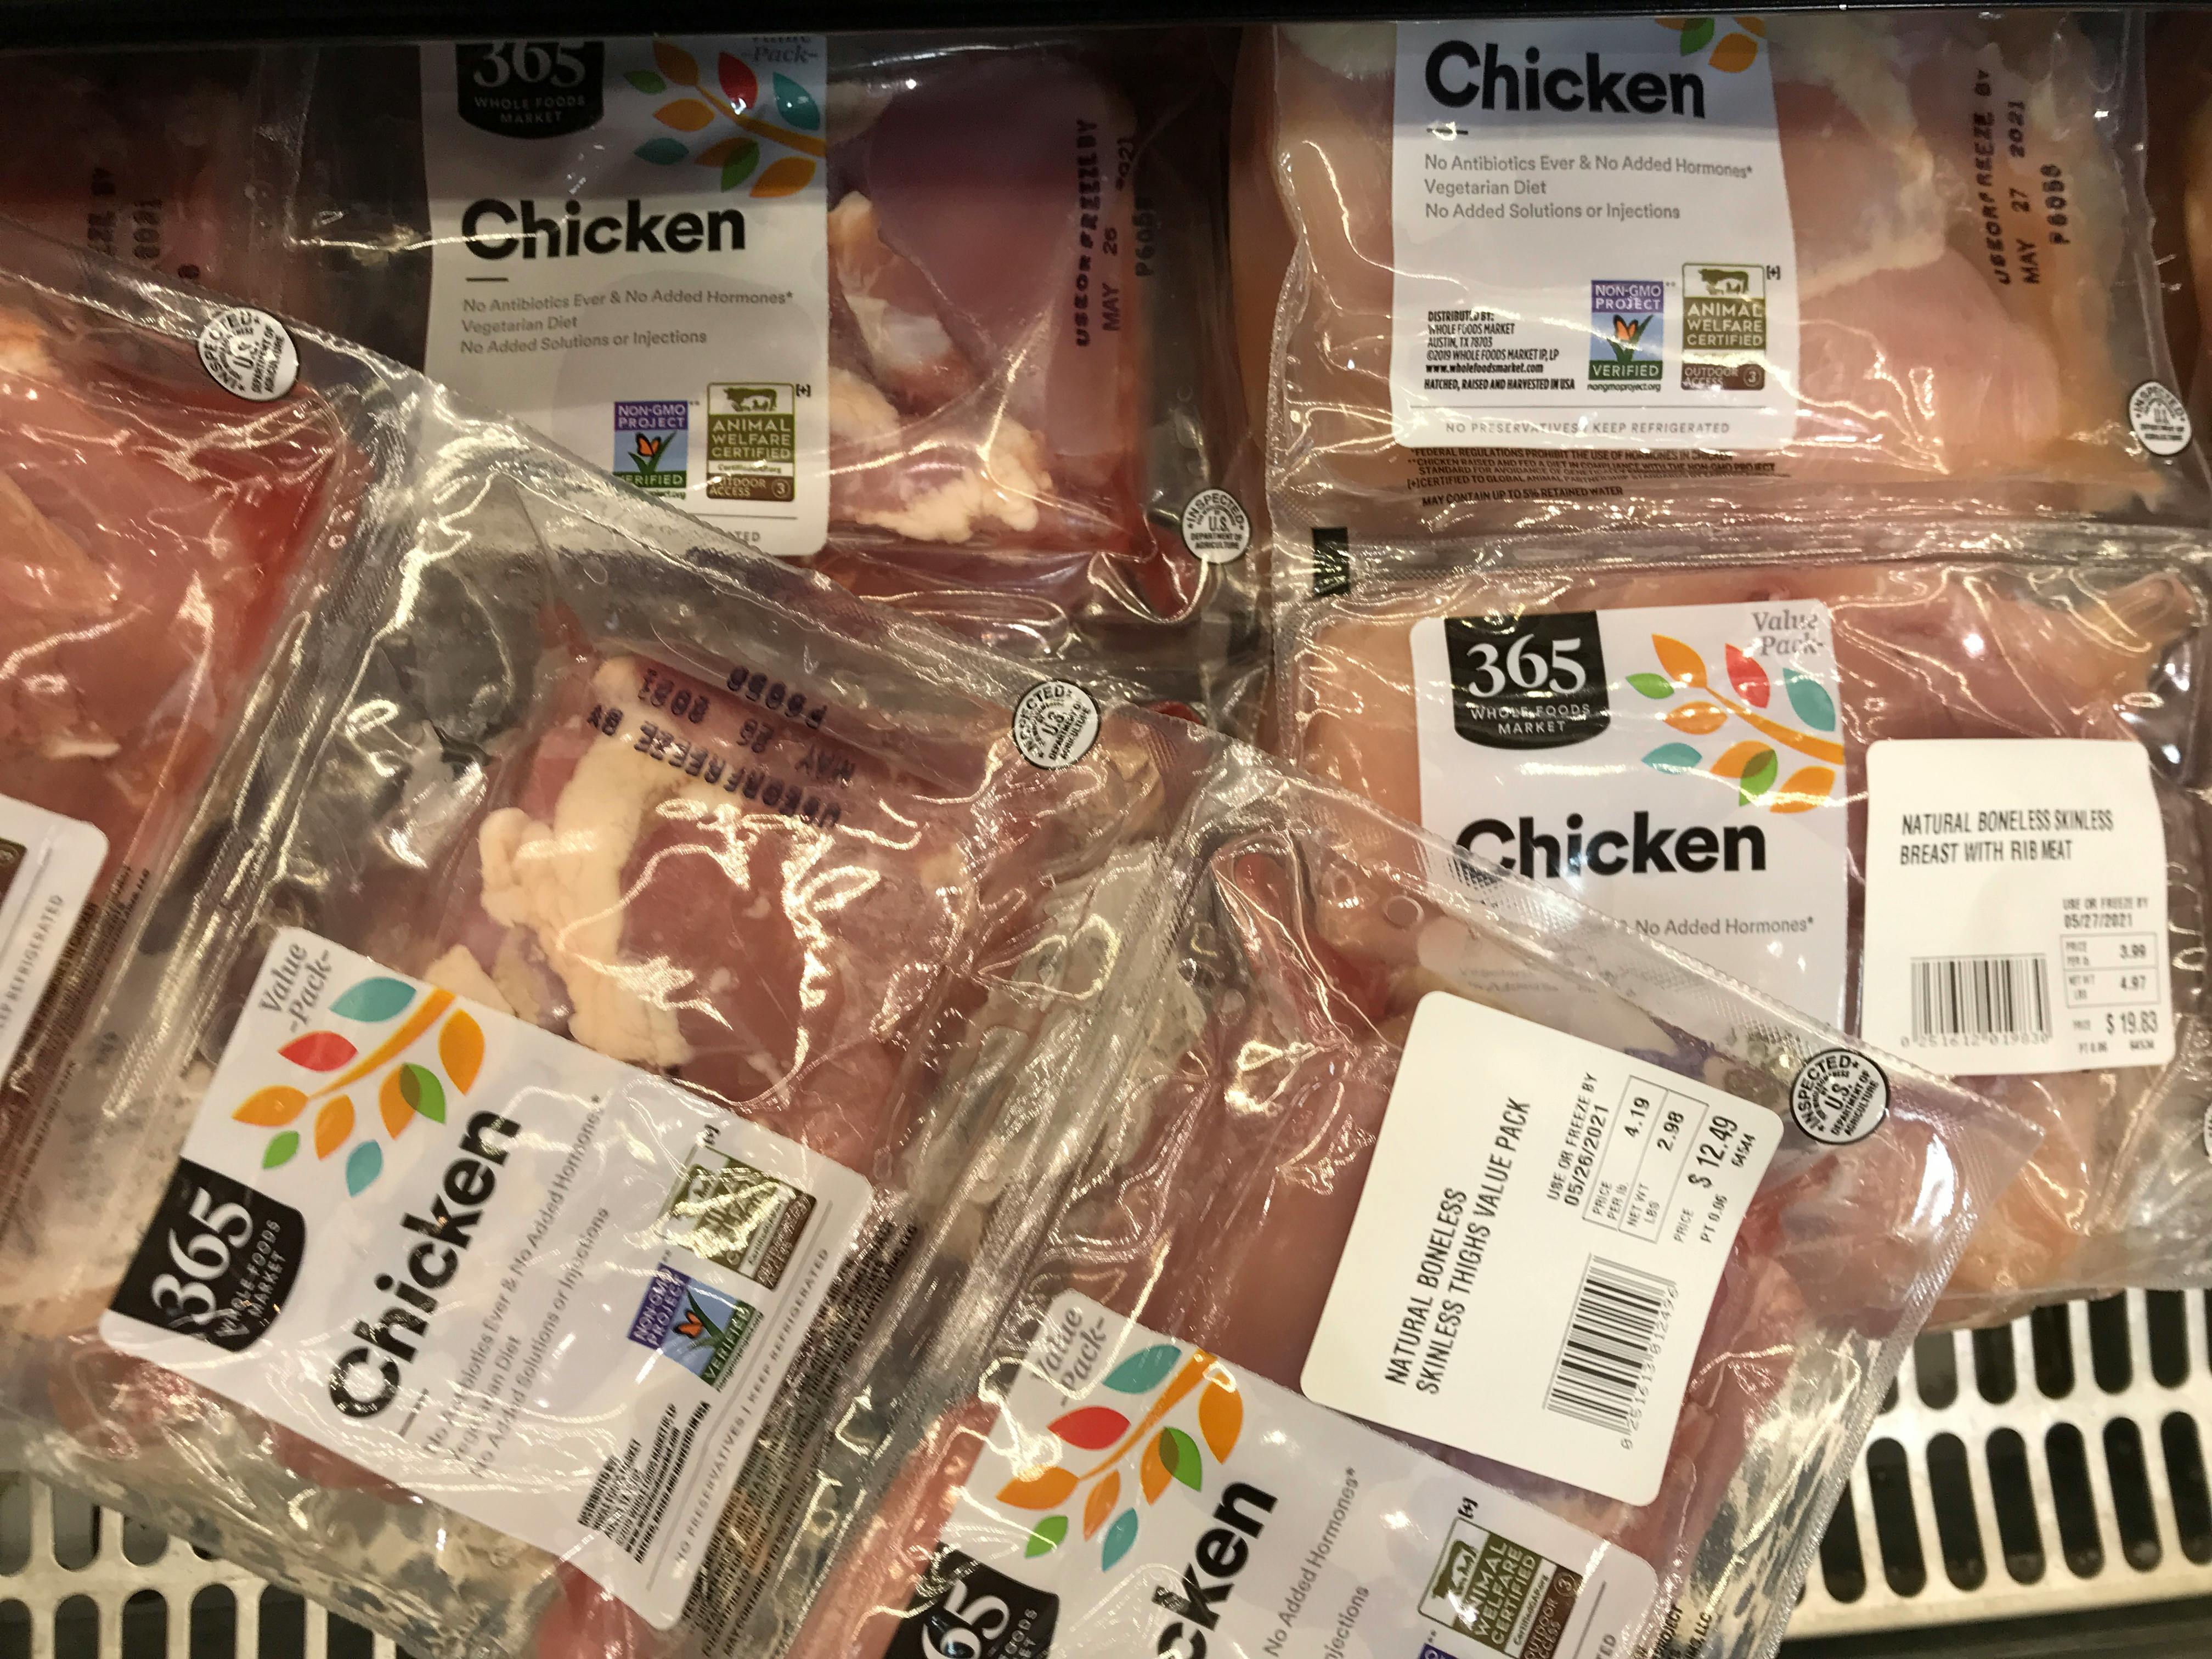 Whole Foods 365 value packs of chicken.